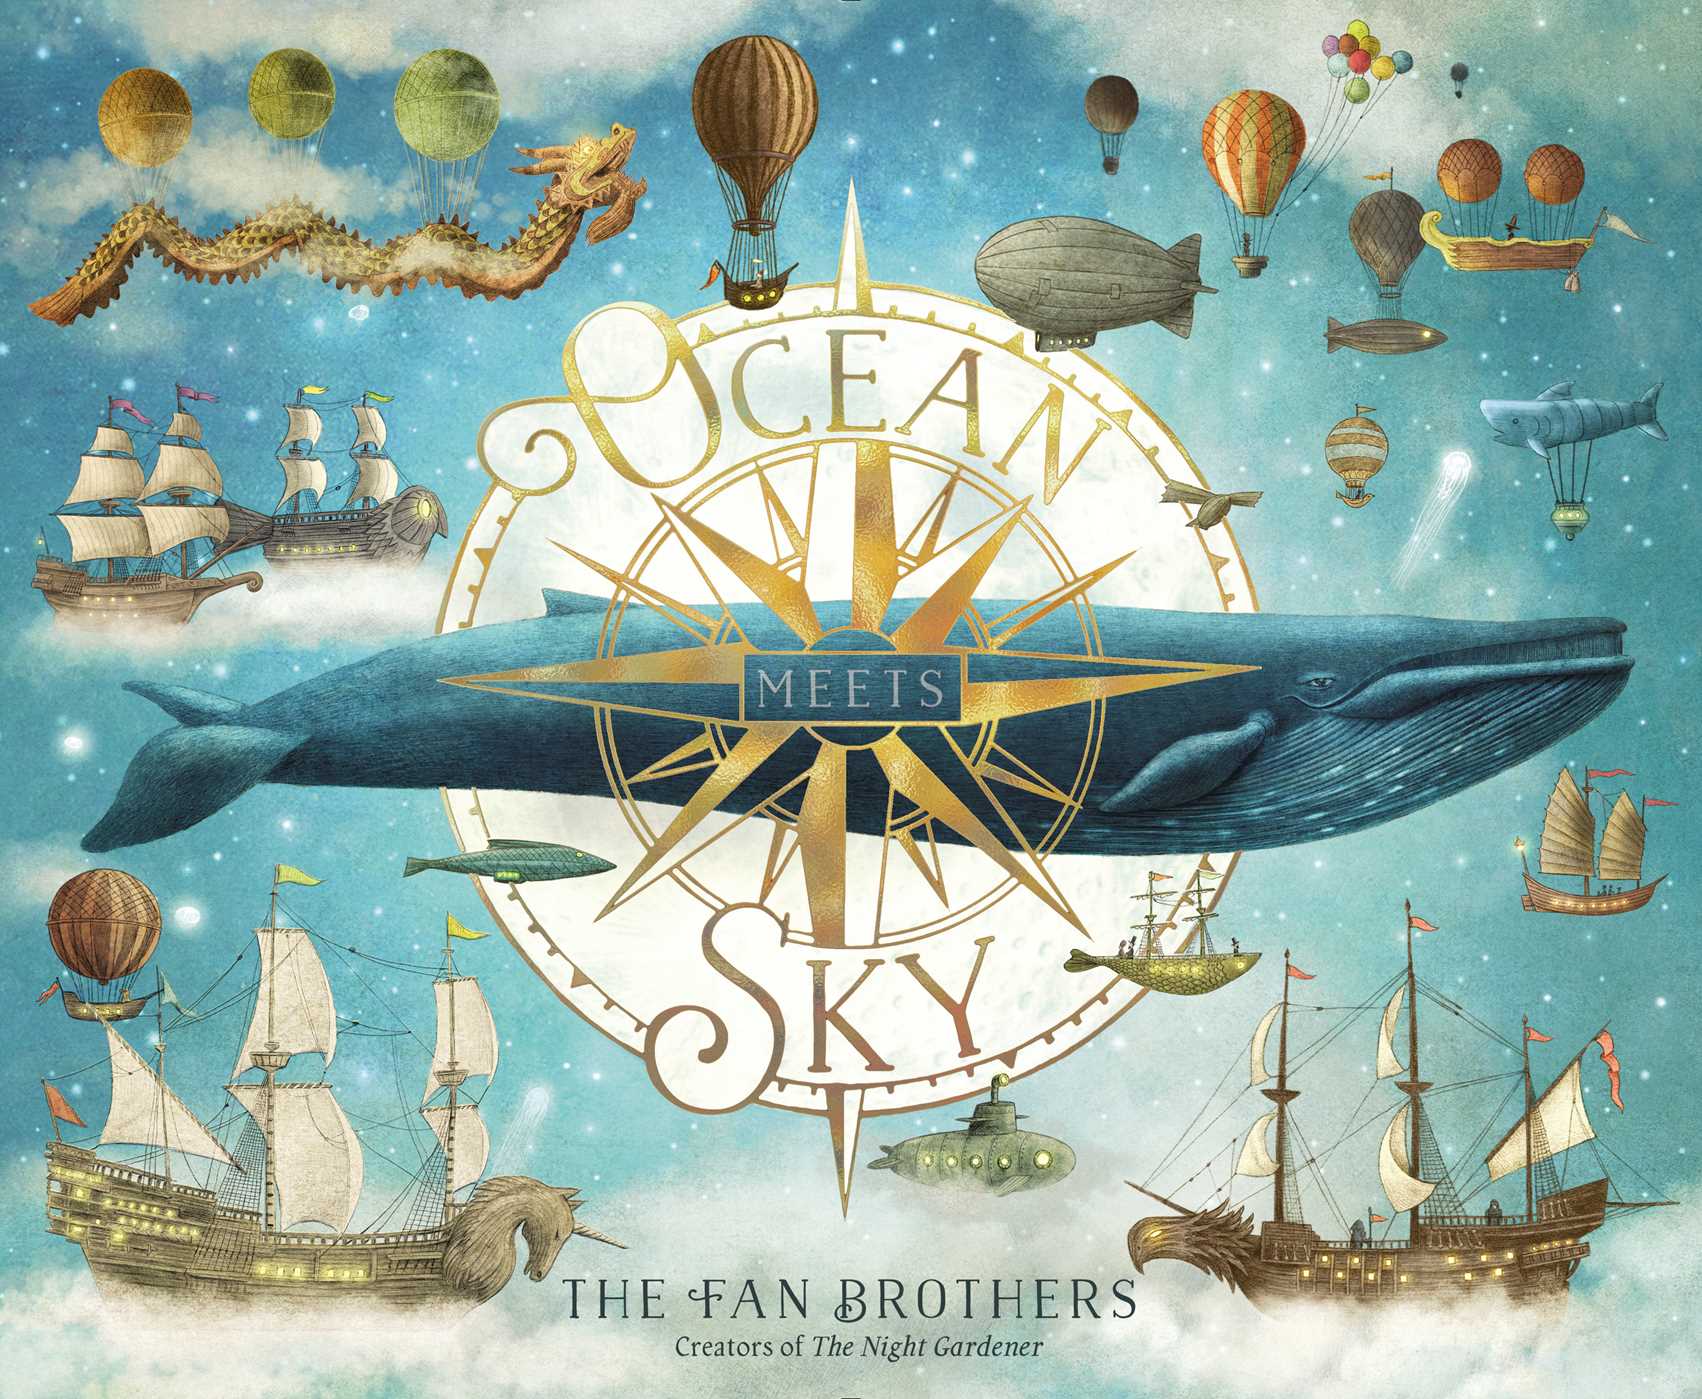 celebrate-picture-books-picture-book-review-ocean-meets-sky-cover